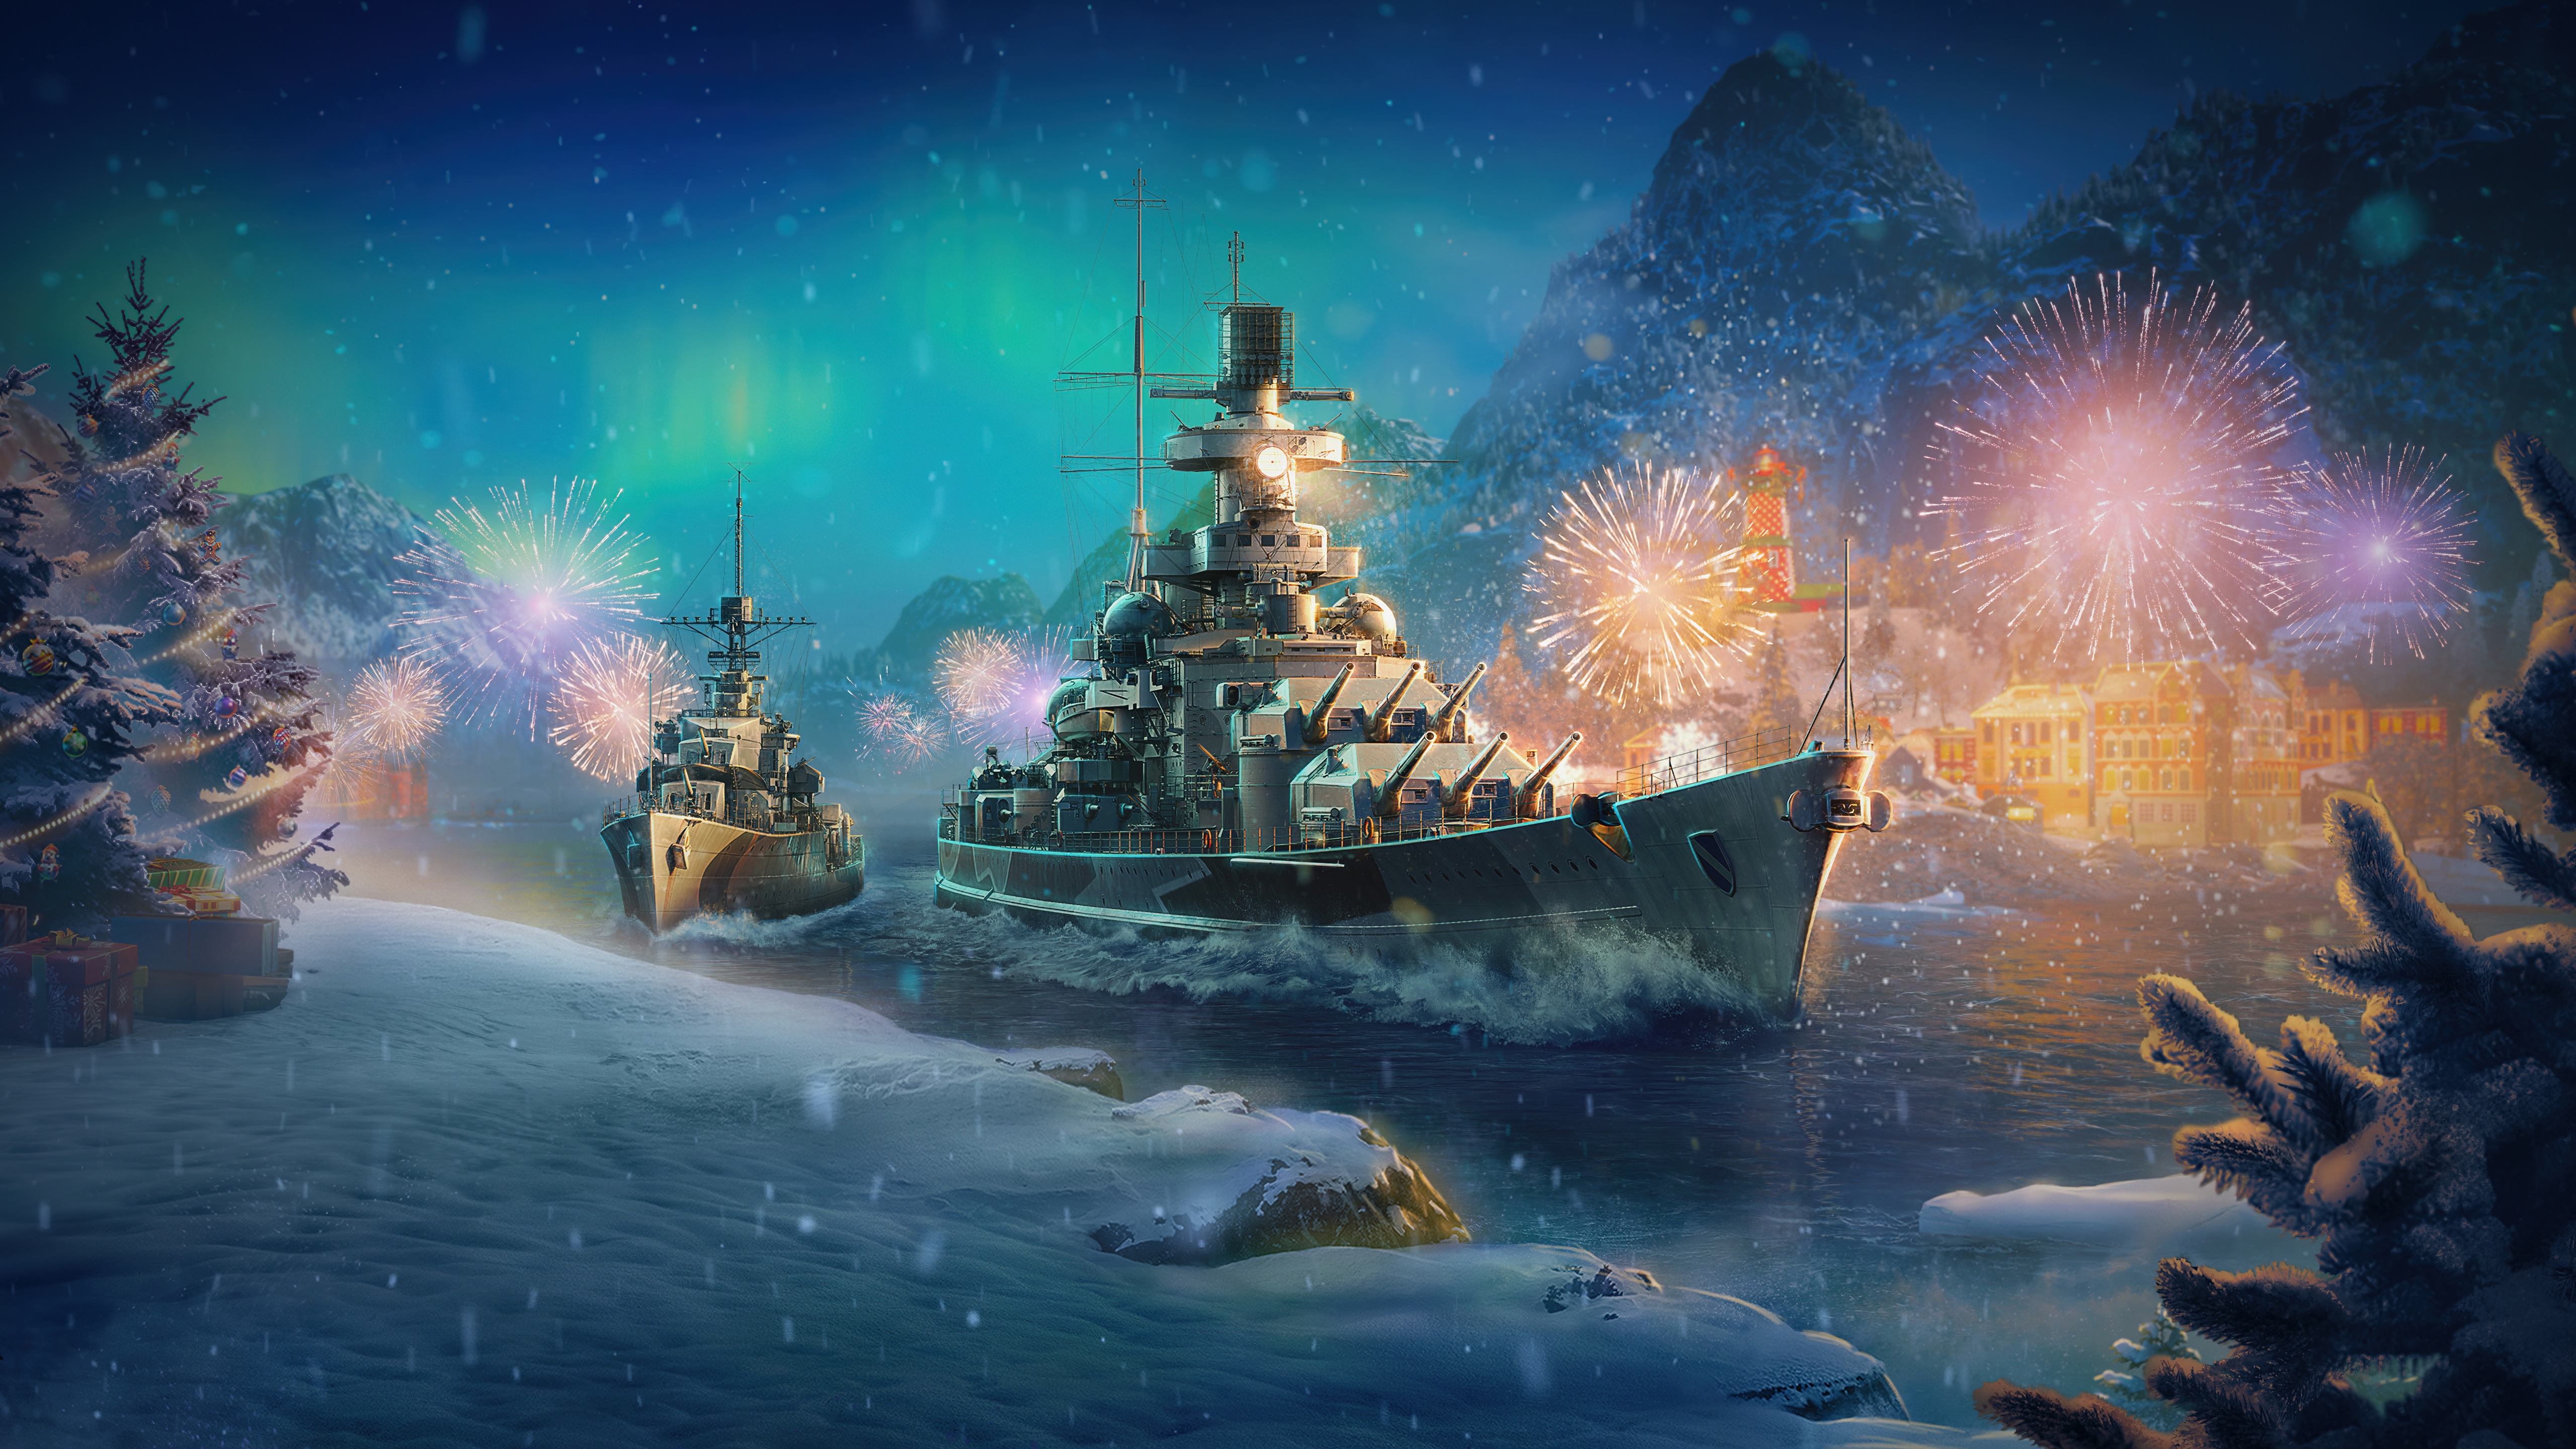 HD wallpaper, Christmas Special, 5K, World Of Warships, Fireworks